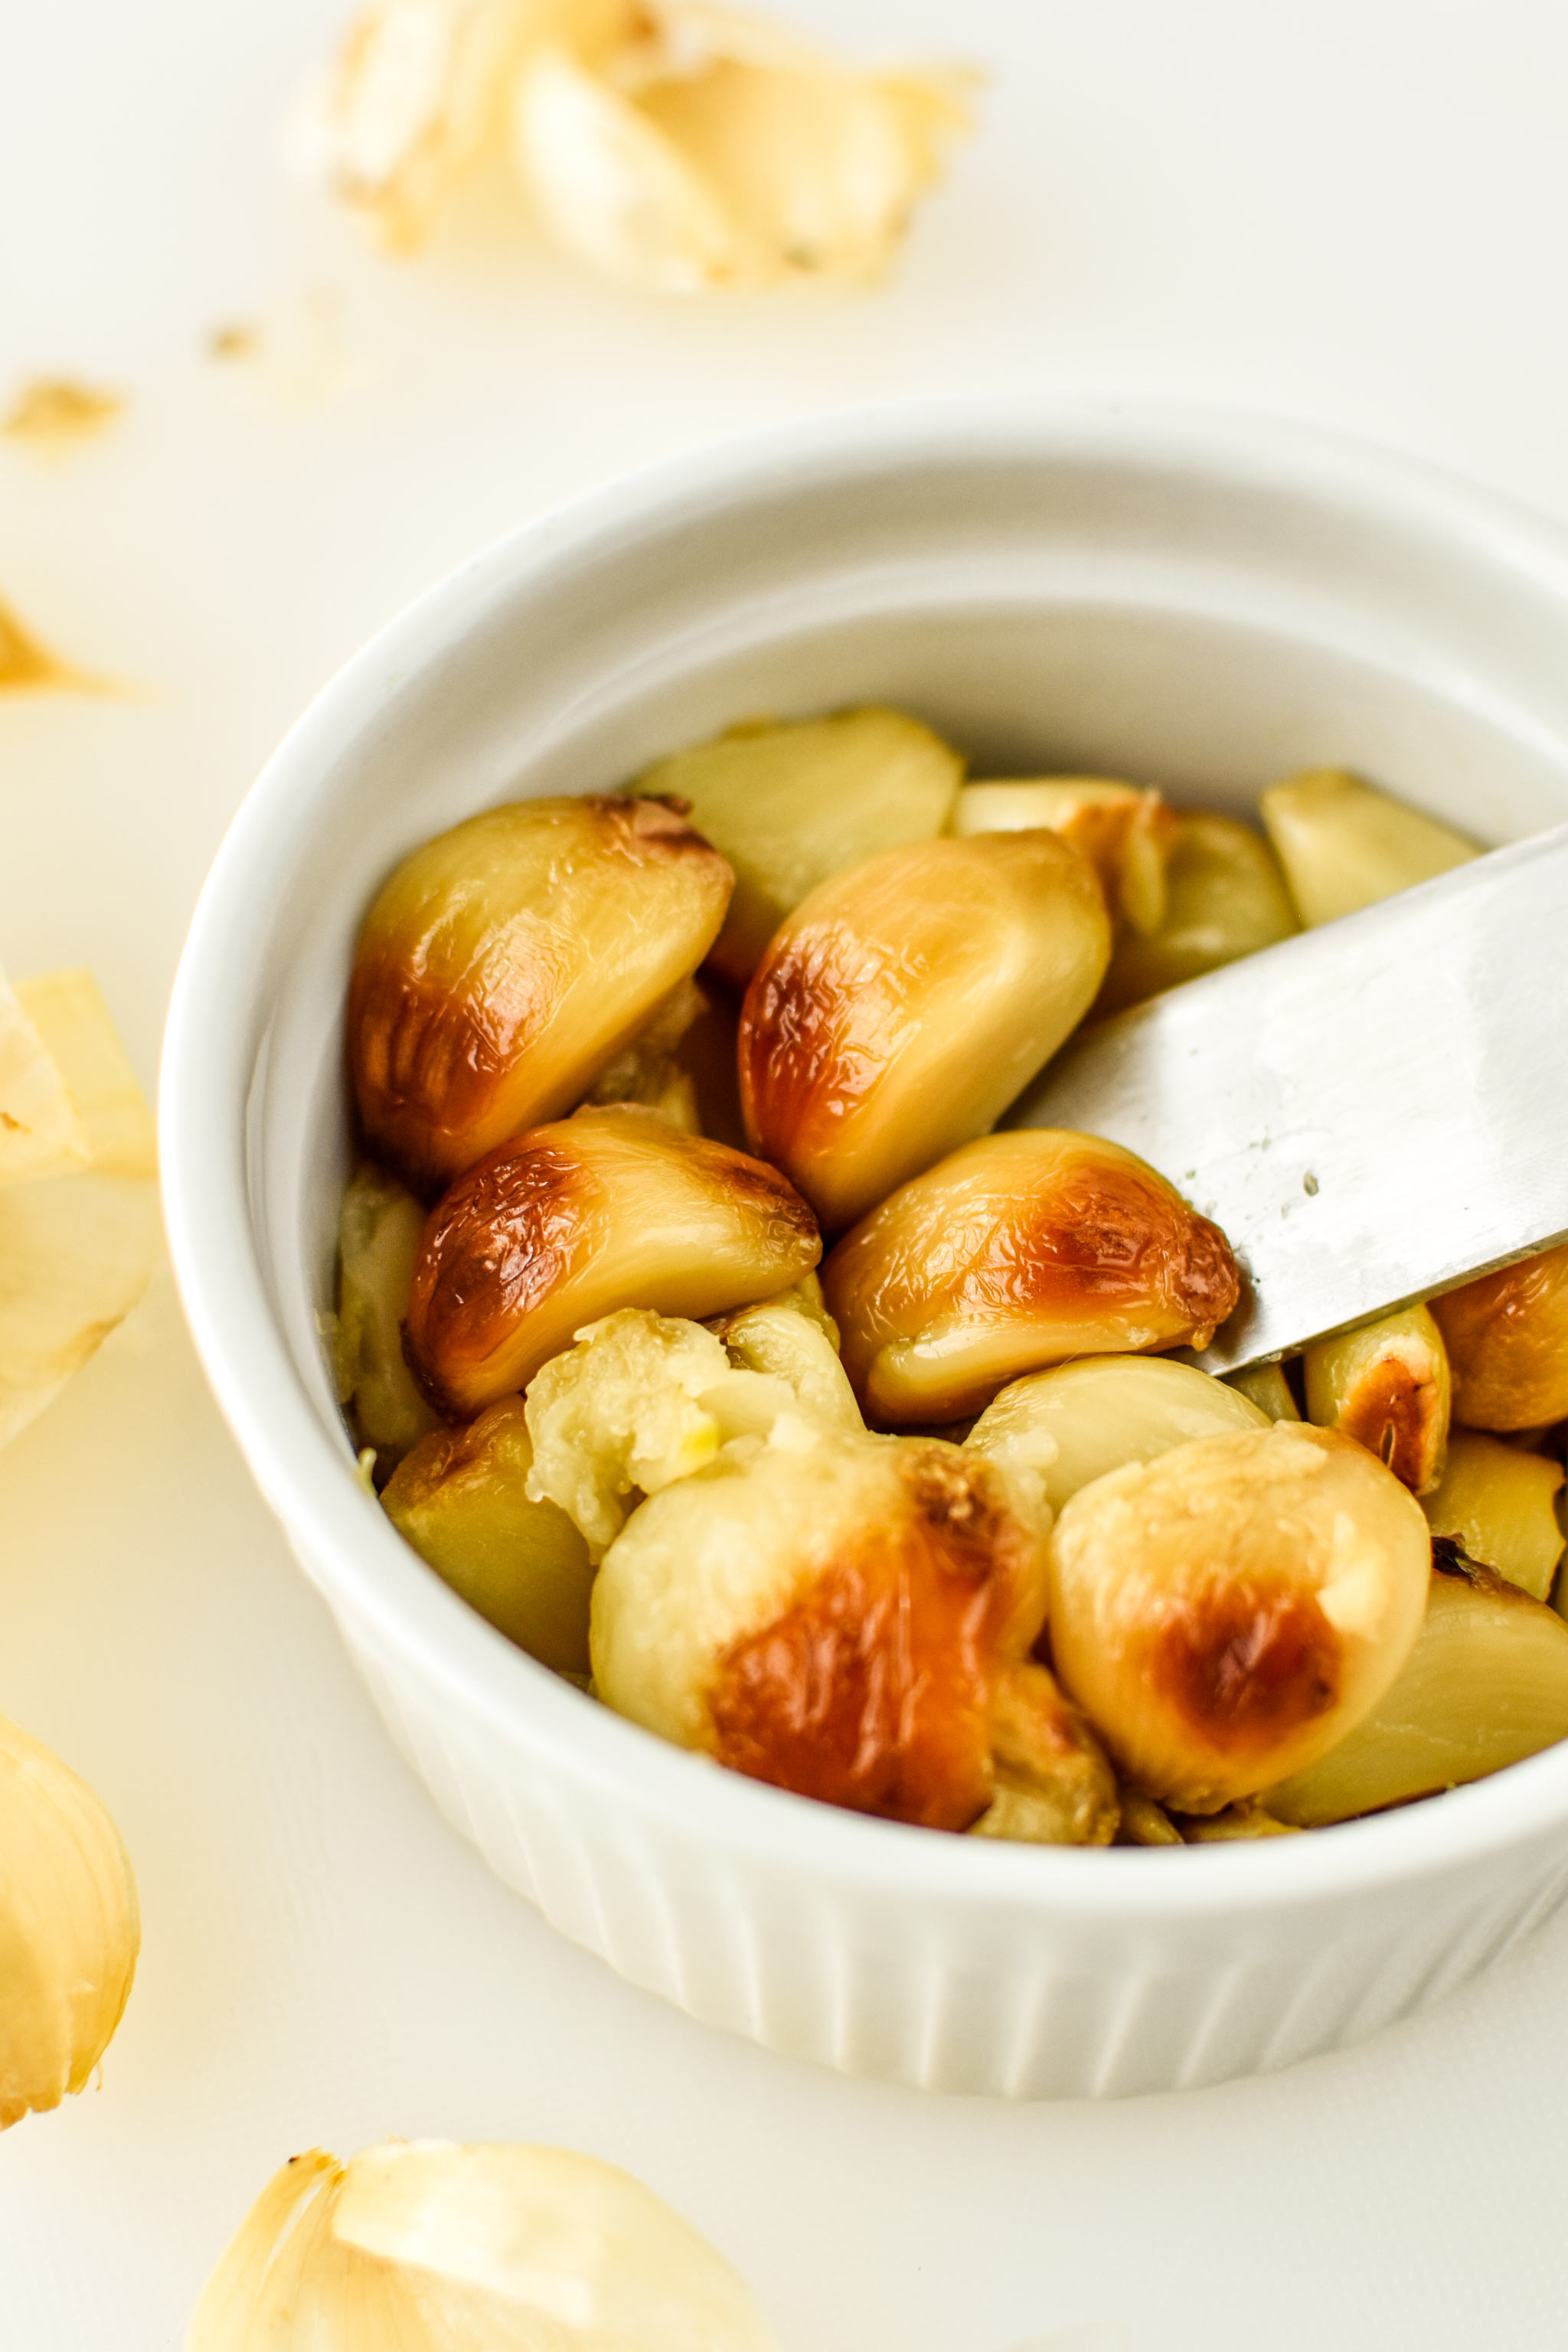 Roasted garlic made in the air fryer. Mash it up for an excellent bread topping!